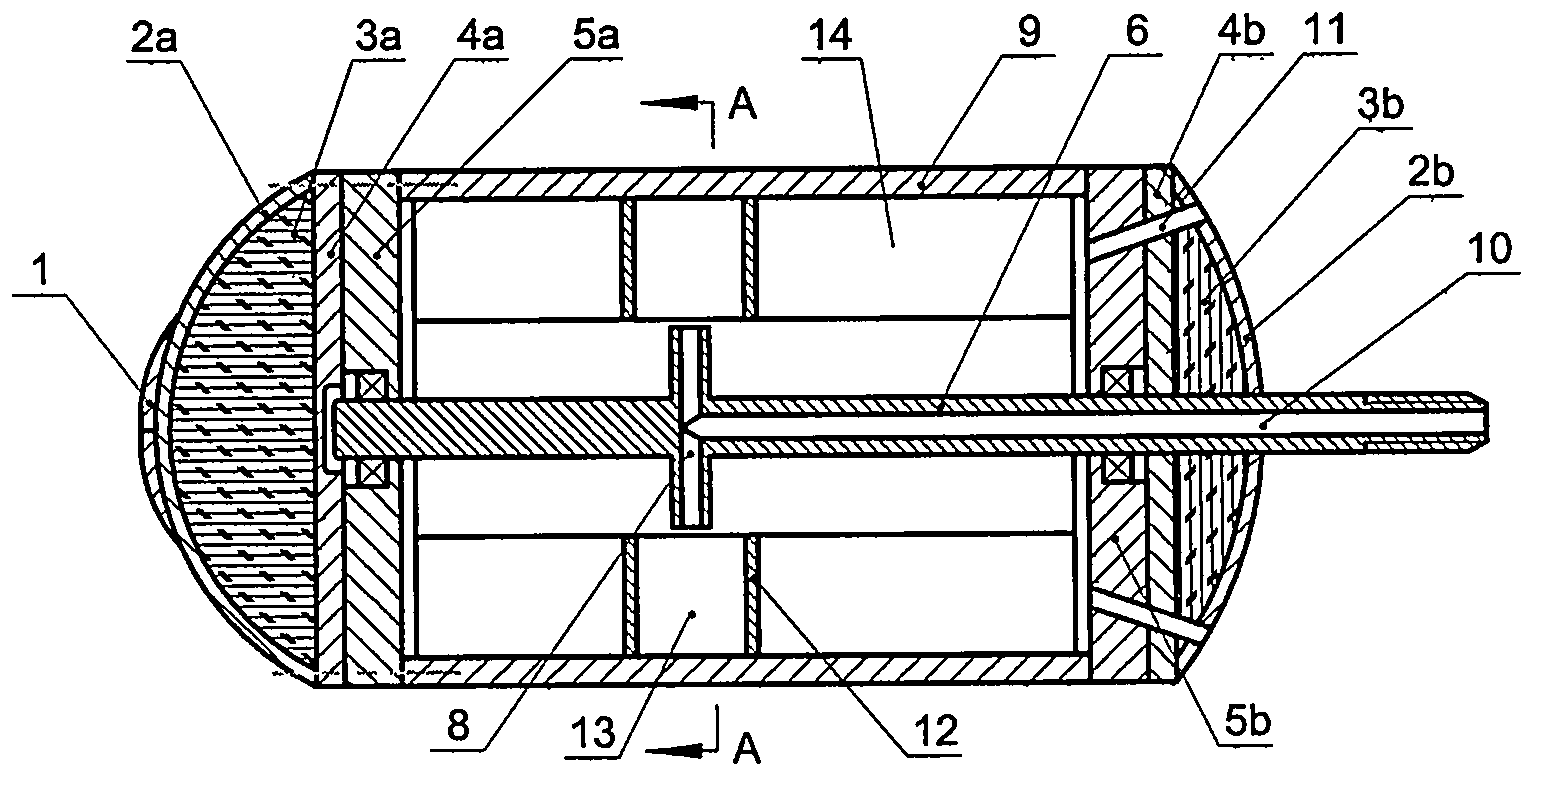 Air-powered rotary-cut type pipeline dredging apparatus